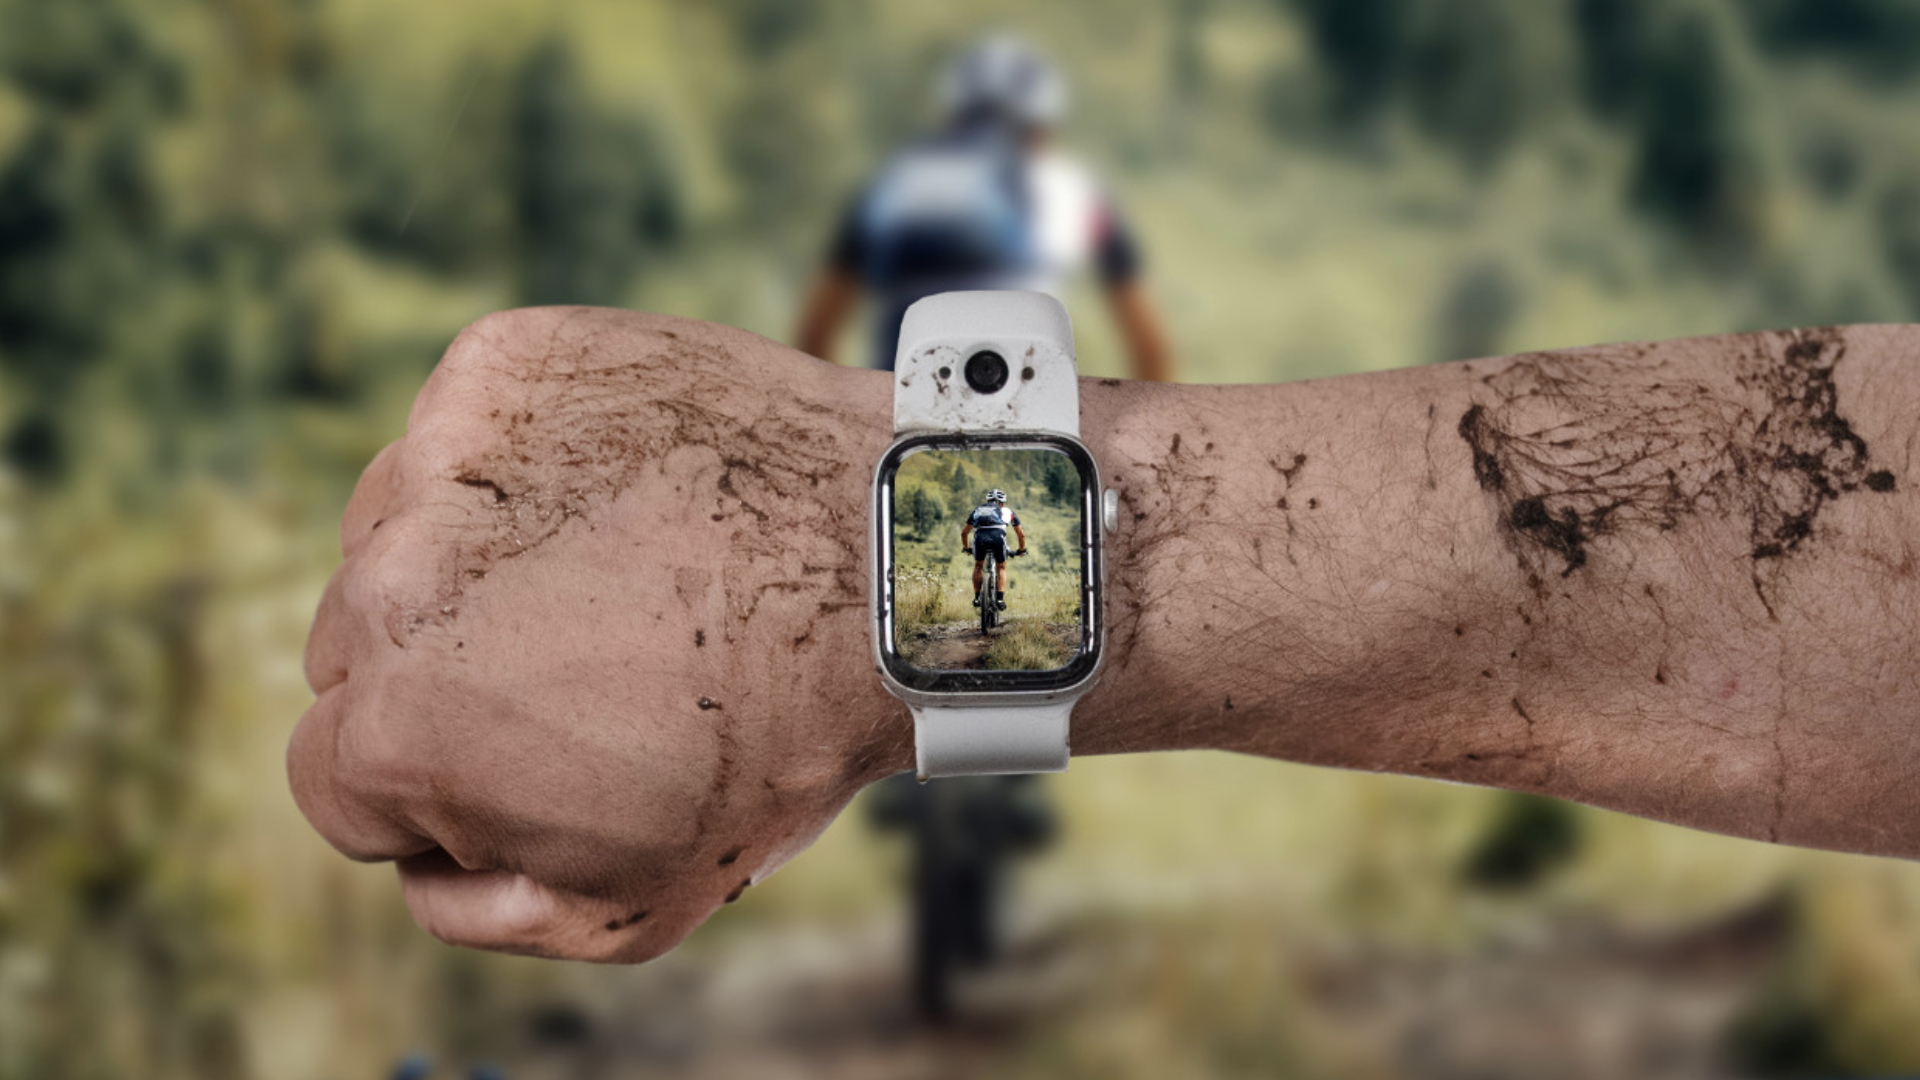 Wristcam Gives the Apple Watch Eyes to See | CineD